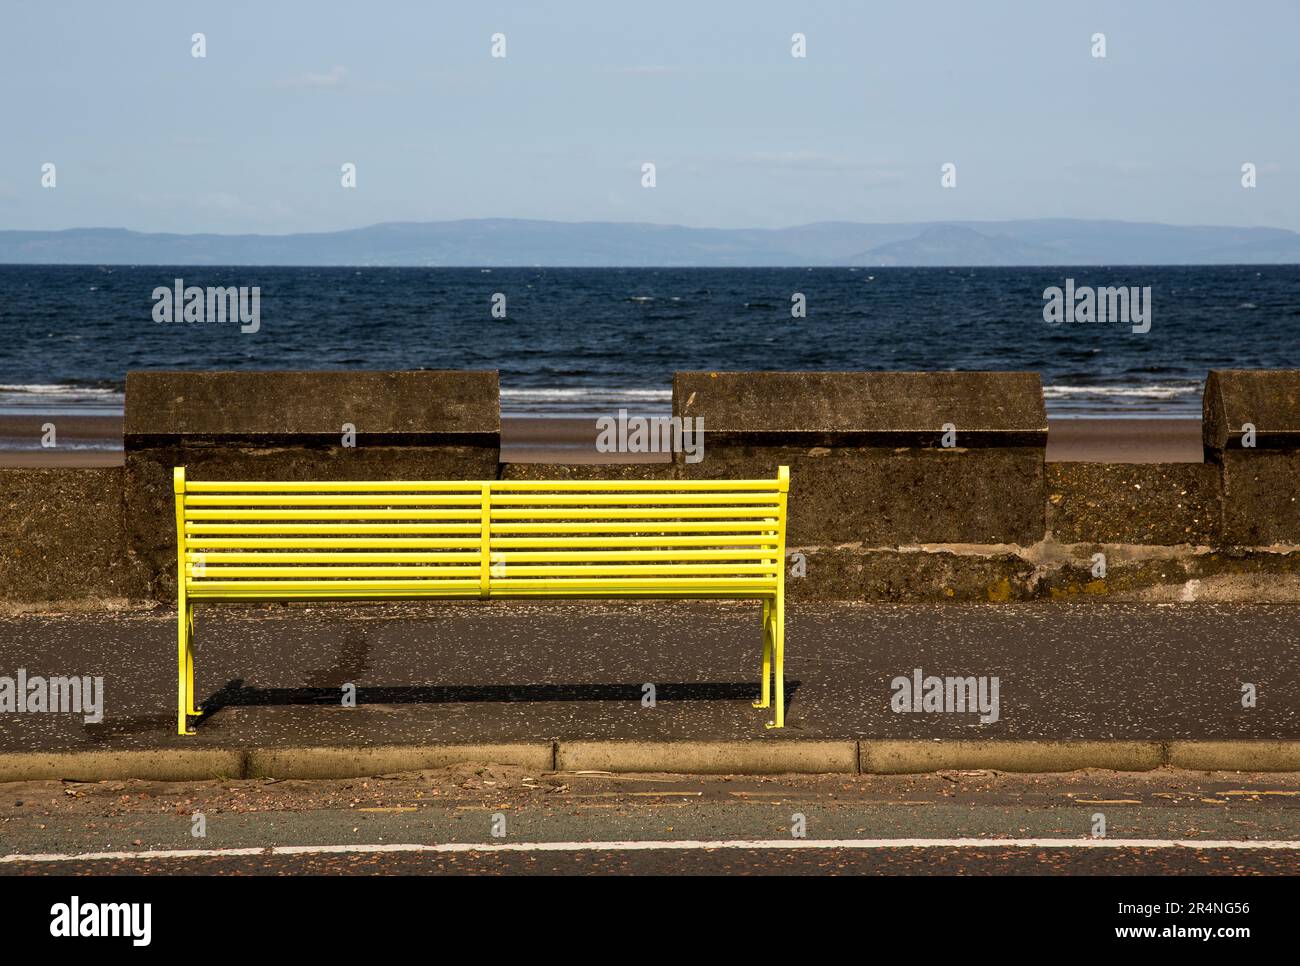 Yellow public bench seat at a coastal seafront location Stock Photo